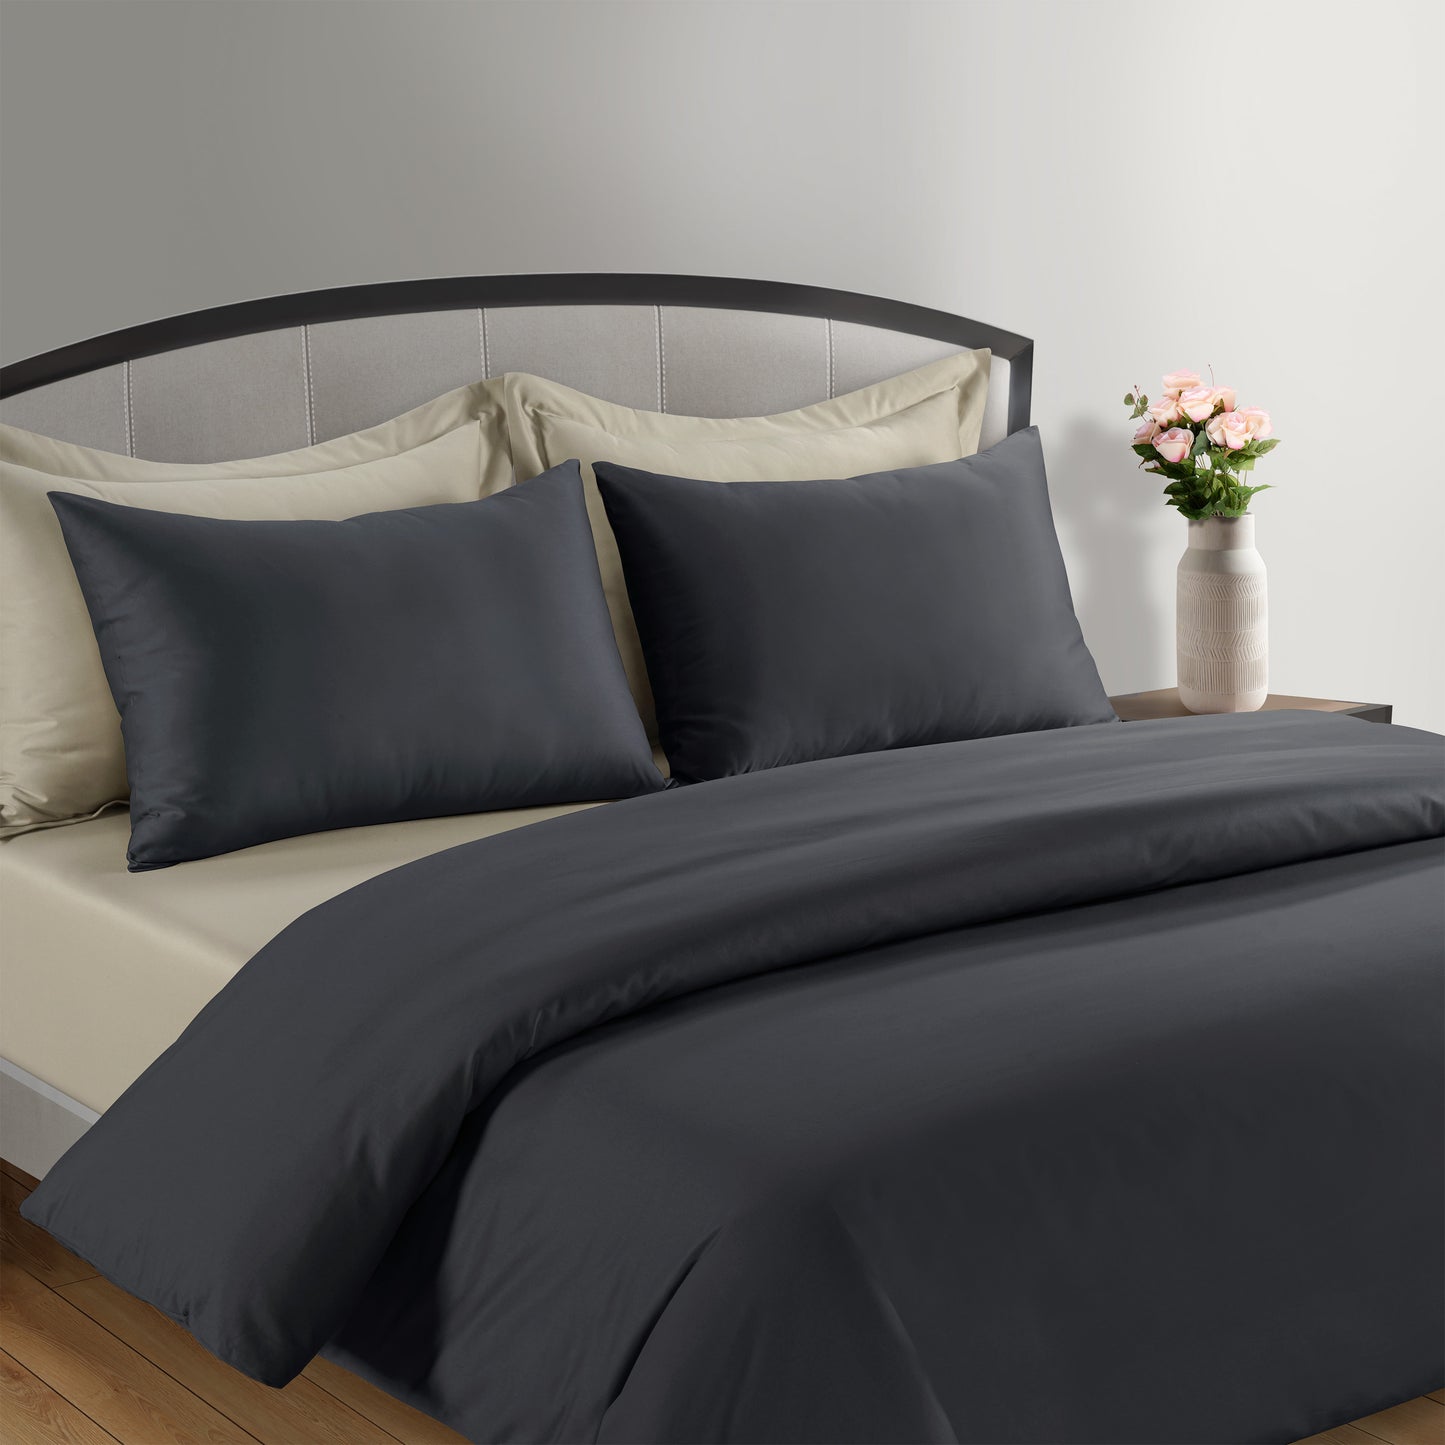 300 Thread Count Peaceful Empress - Graphite Grey with Oatmeal Bedding Set